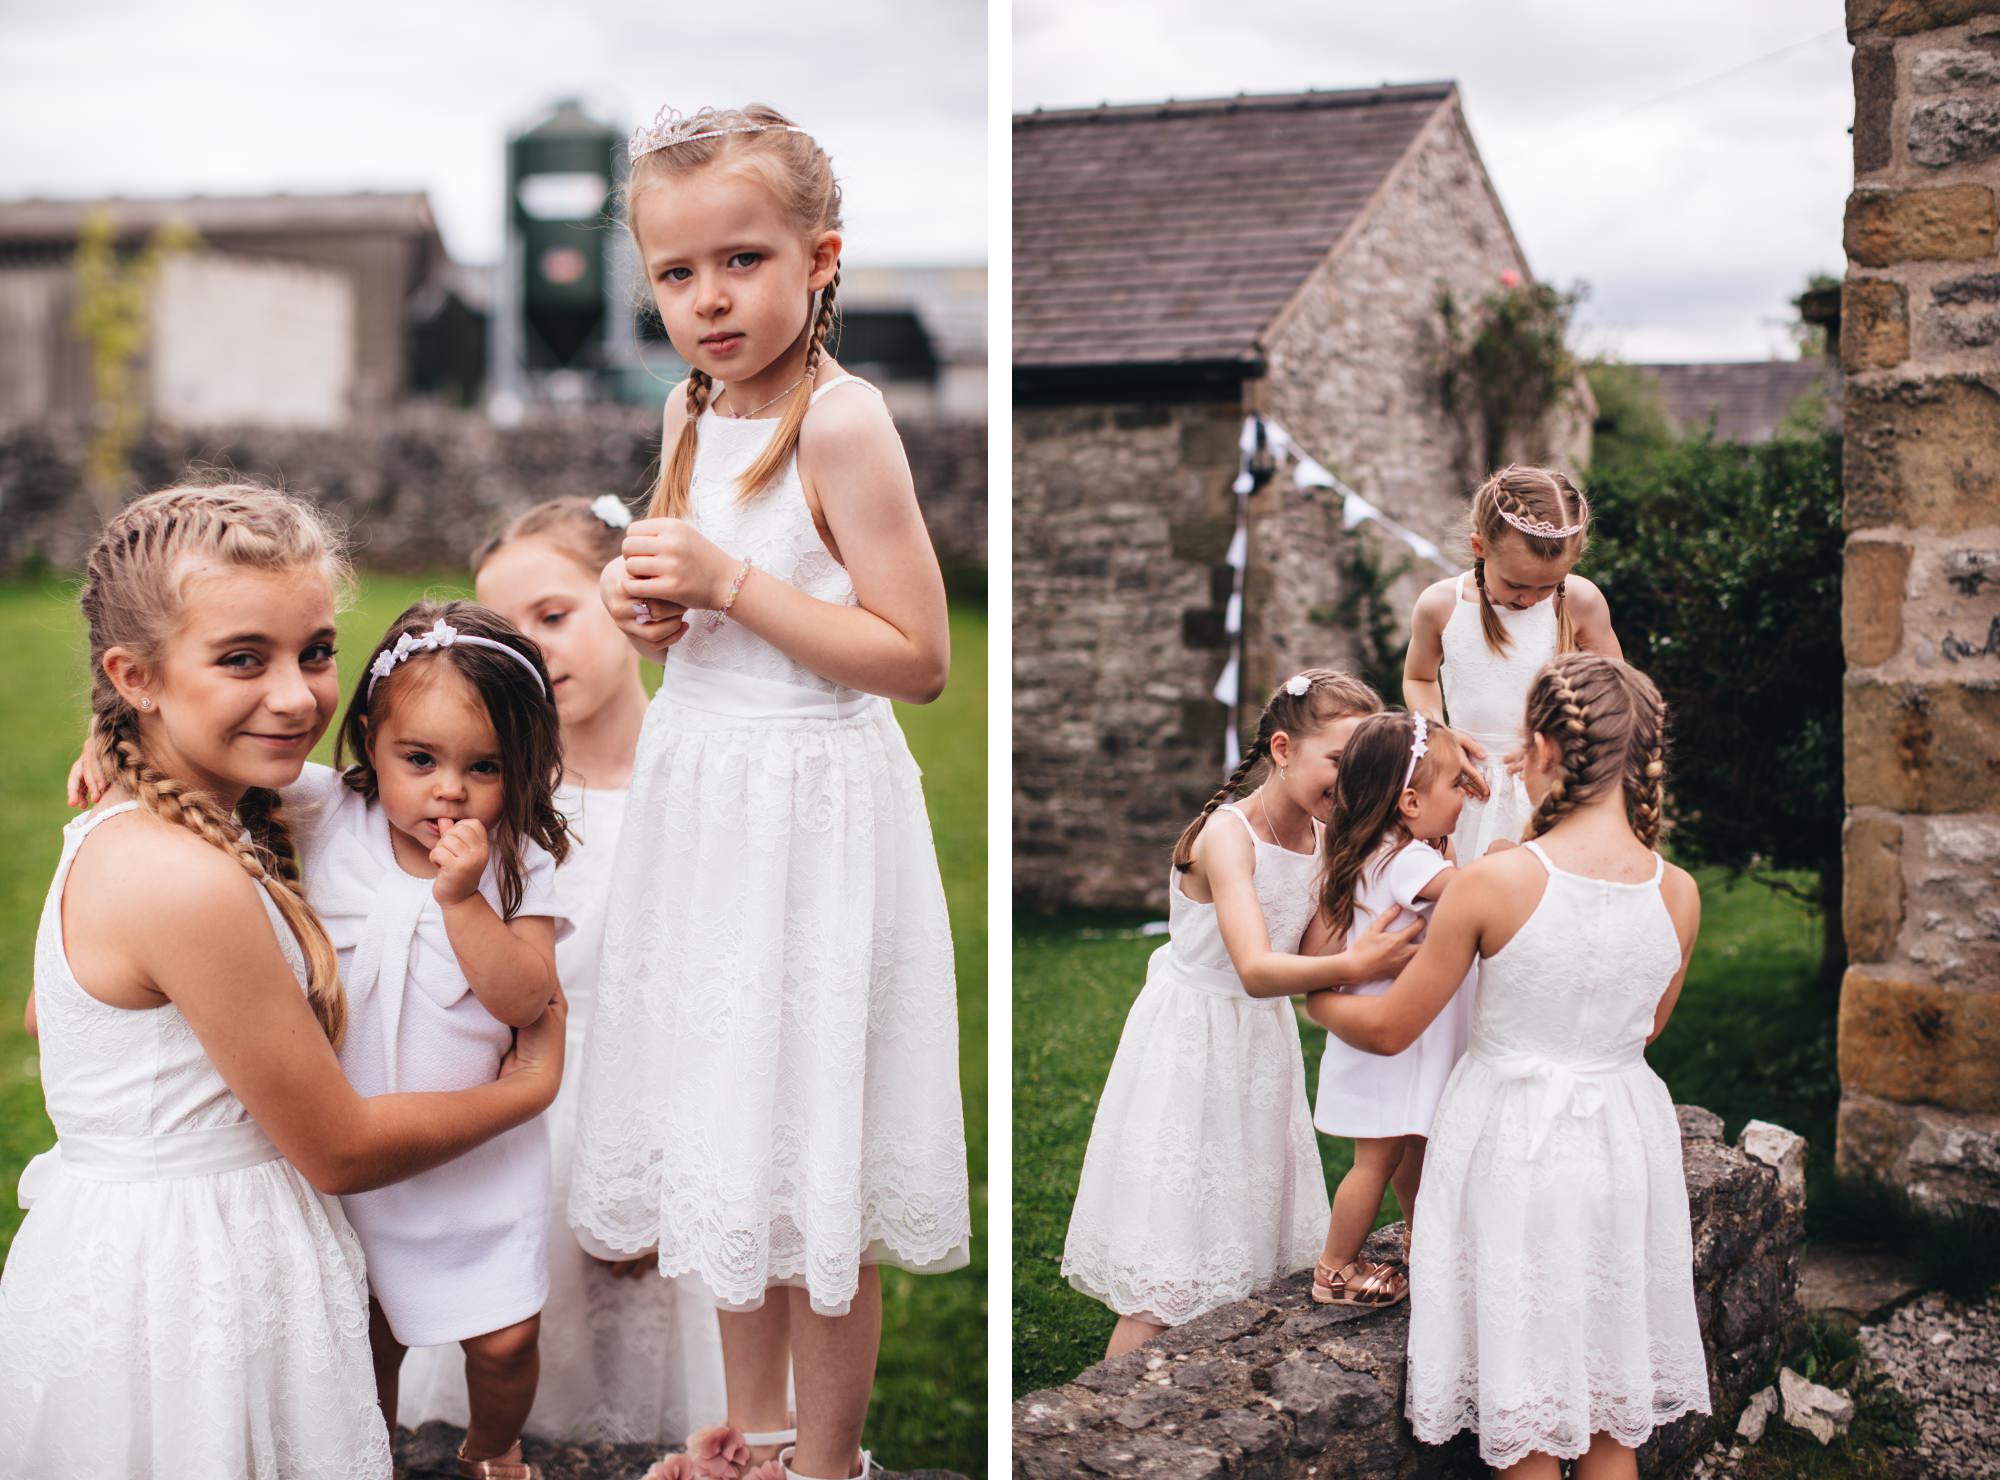 flower girls play together